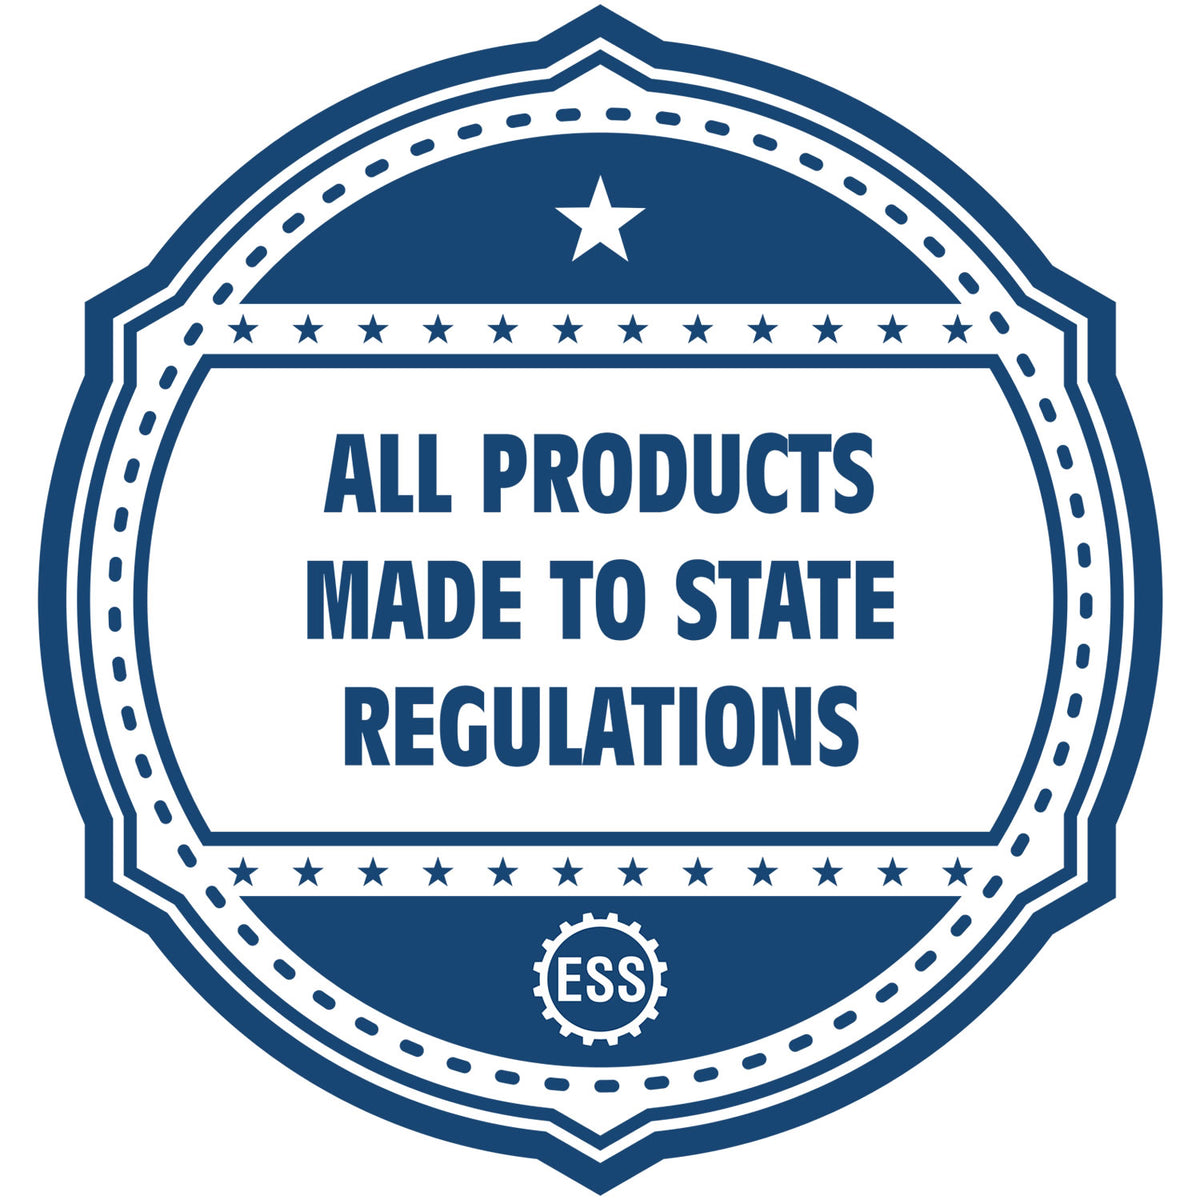 An icon or badge element for the Slim Pre-Inked Florida Architect Seal Stamp showing that this product is made in compliance with state regulations.